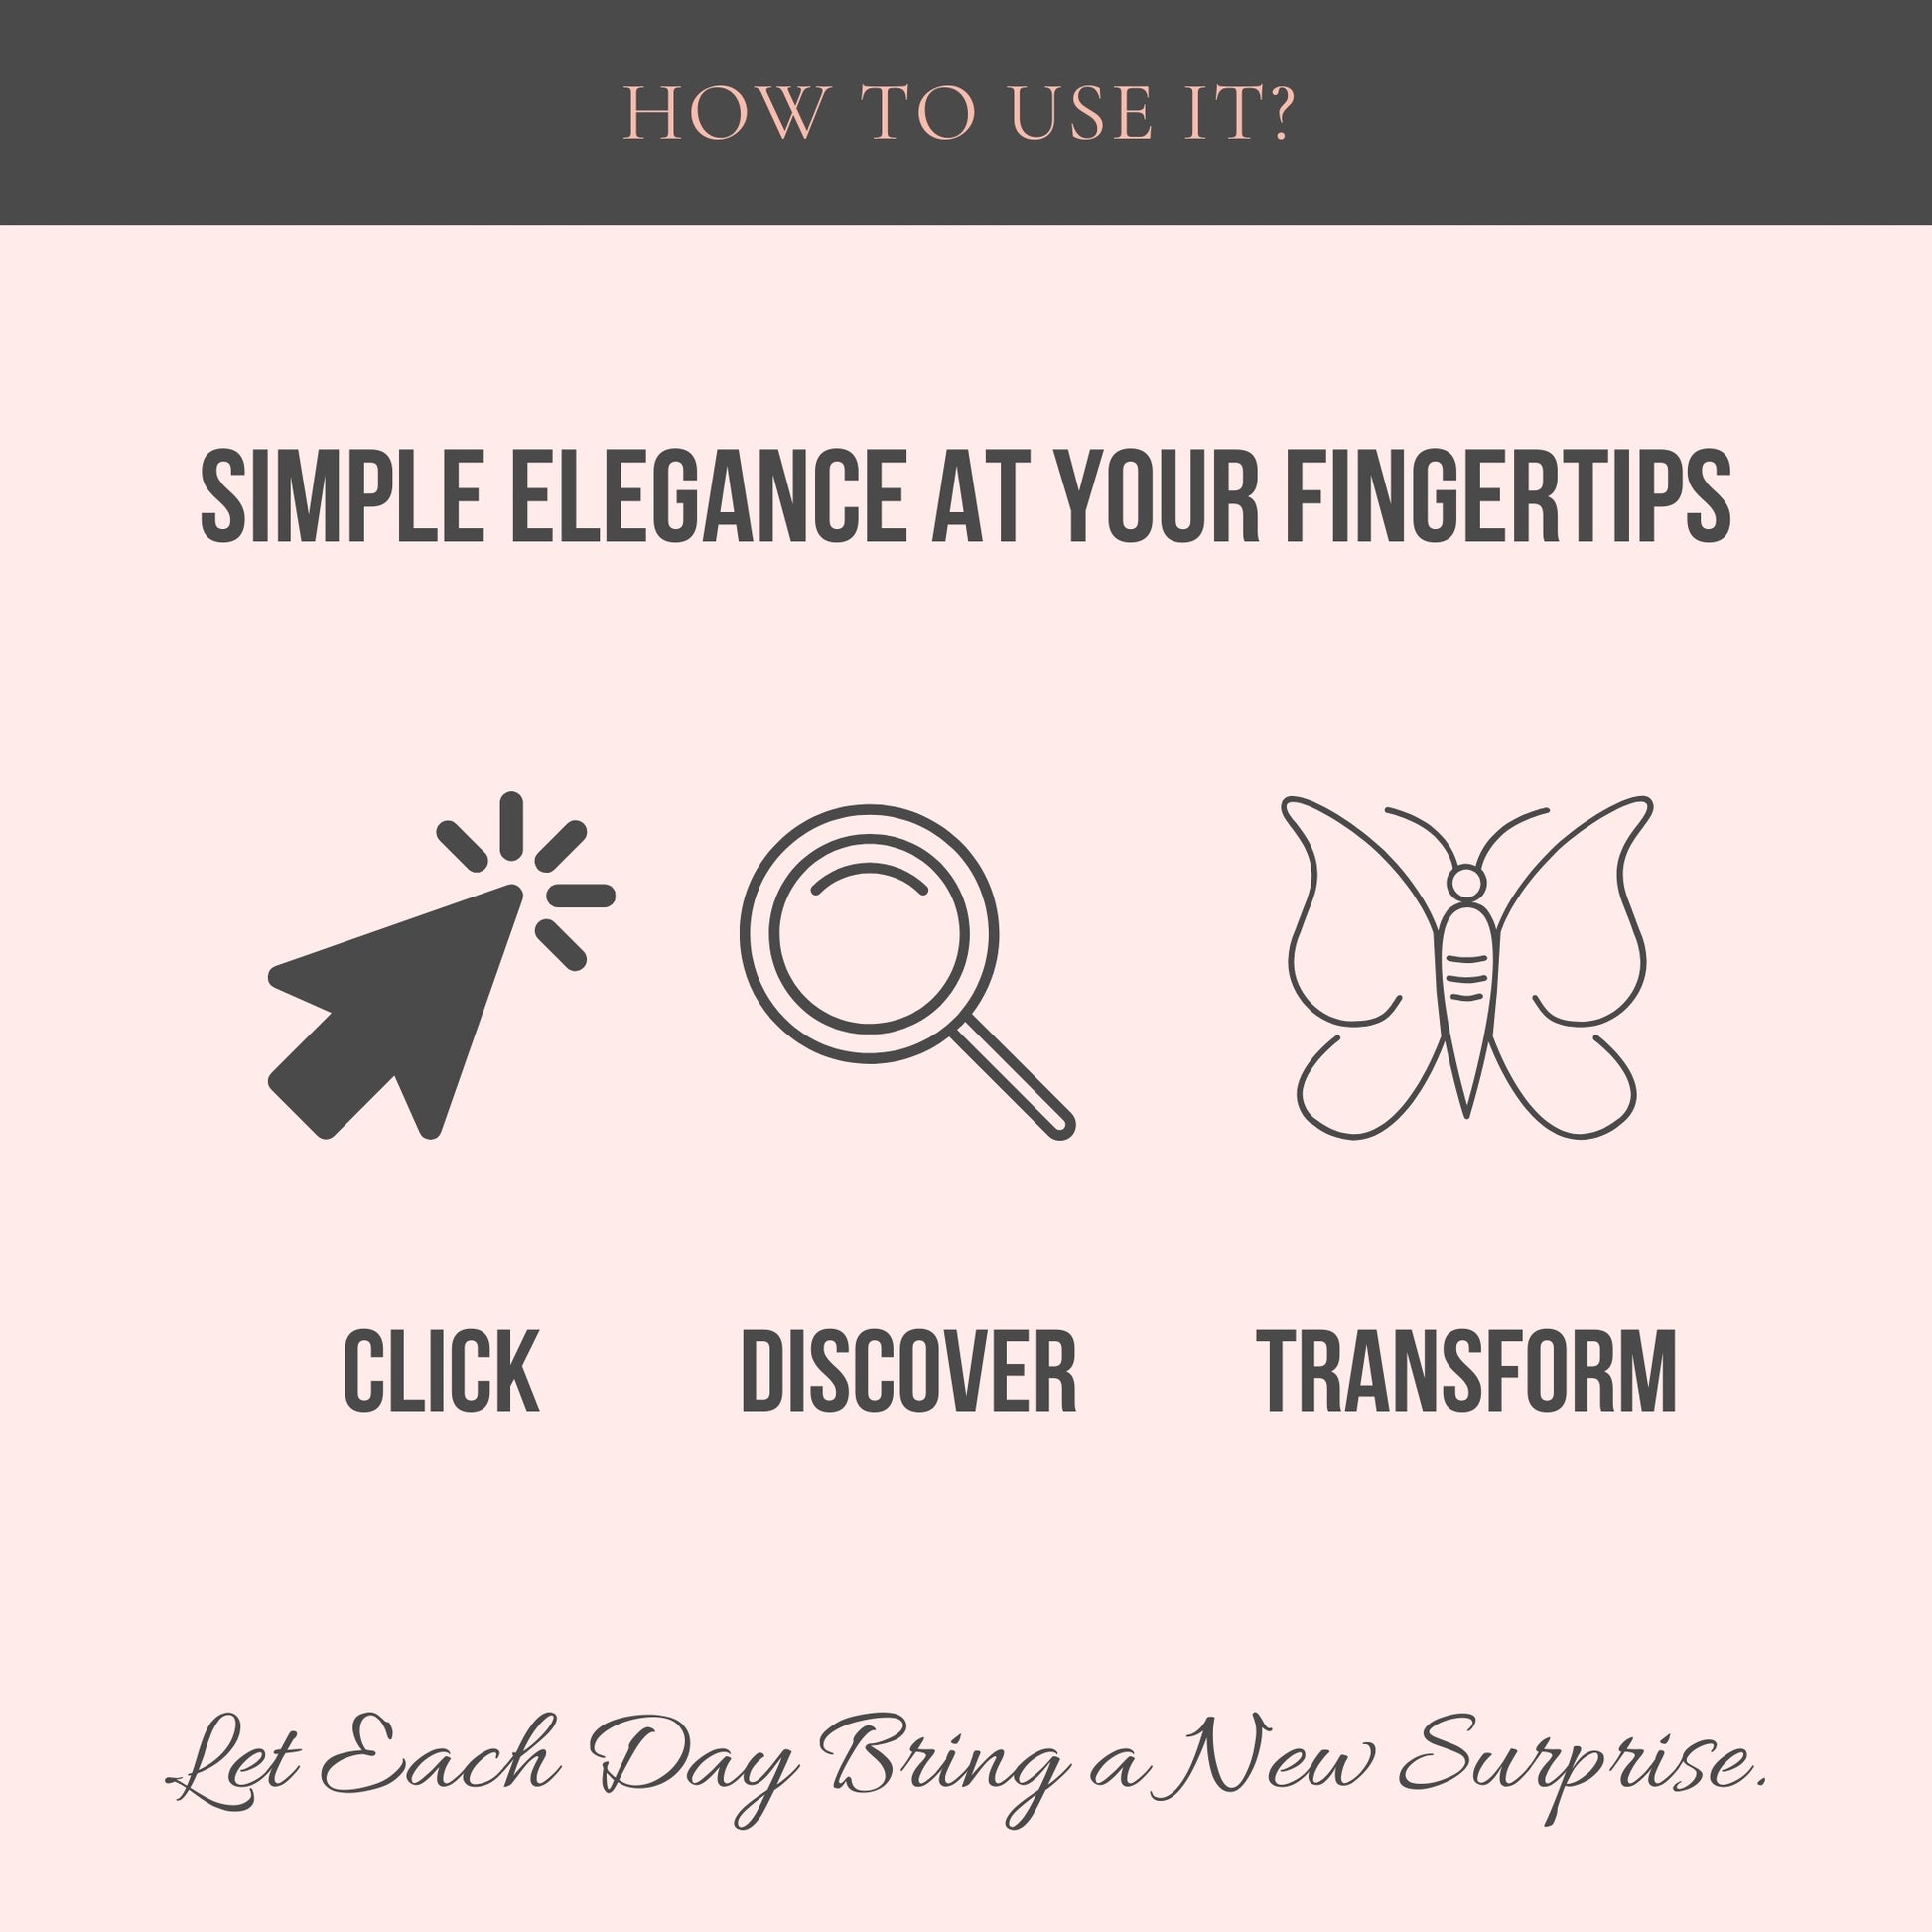 Top center: How to use it? Simple elegance at your fingertips - Click, discover, transform and 3 icons symbolizing each. Bottom Center: Let each day bring a new surprise.